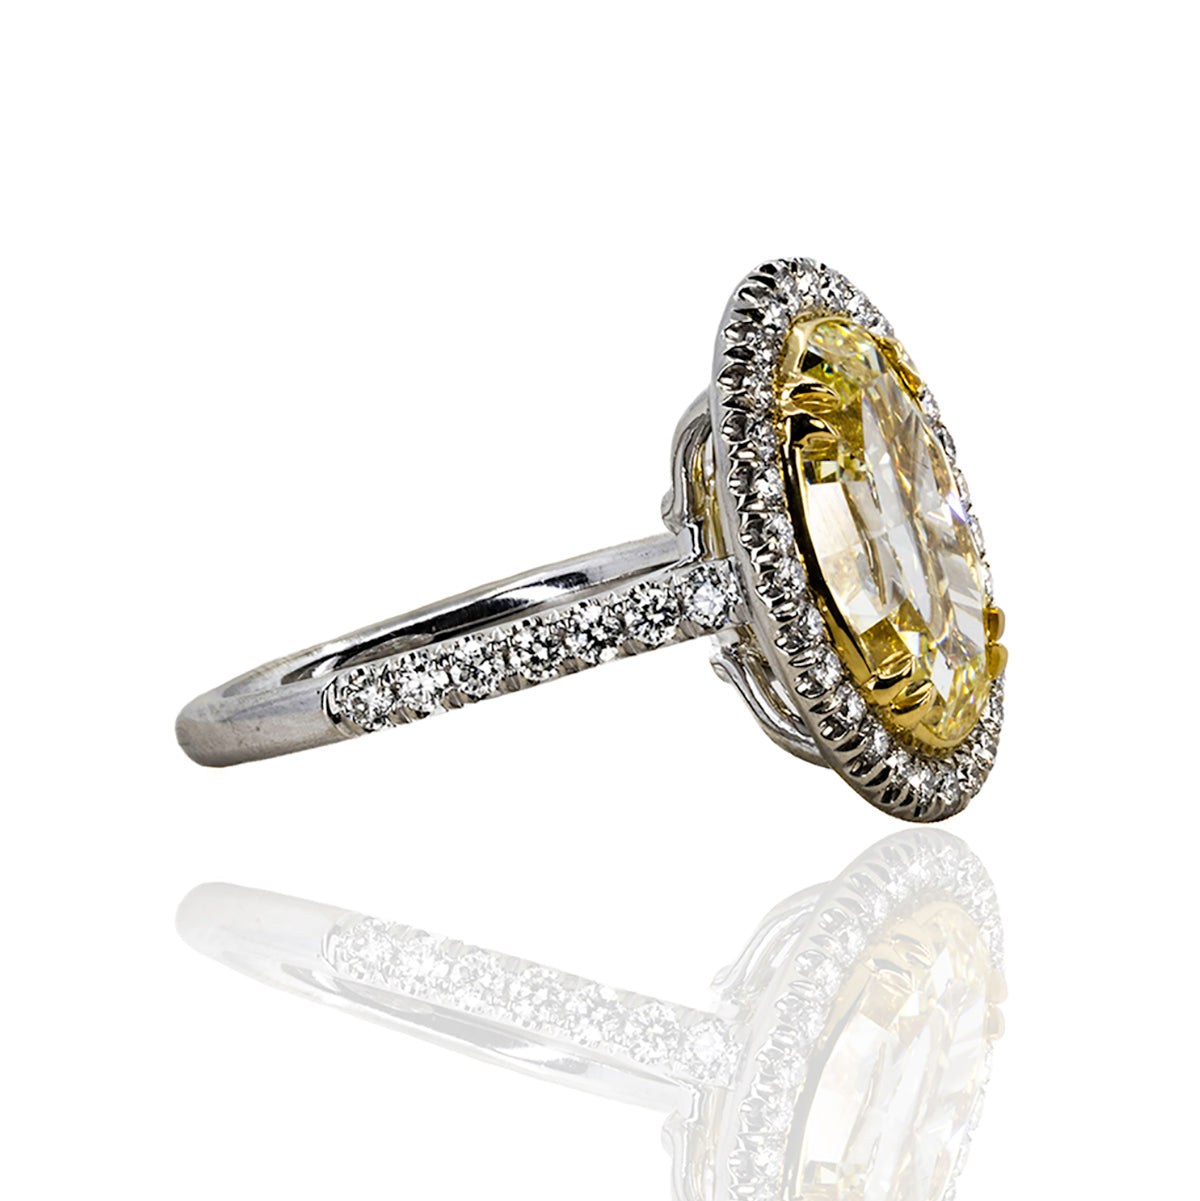 5.80 Light Yellow Oval Ring